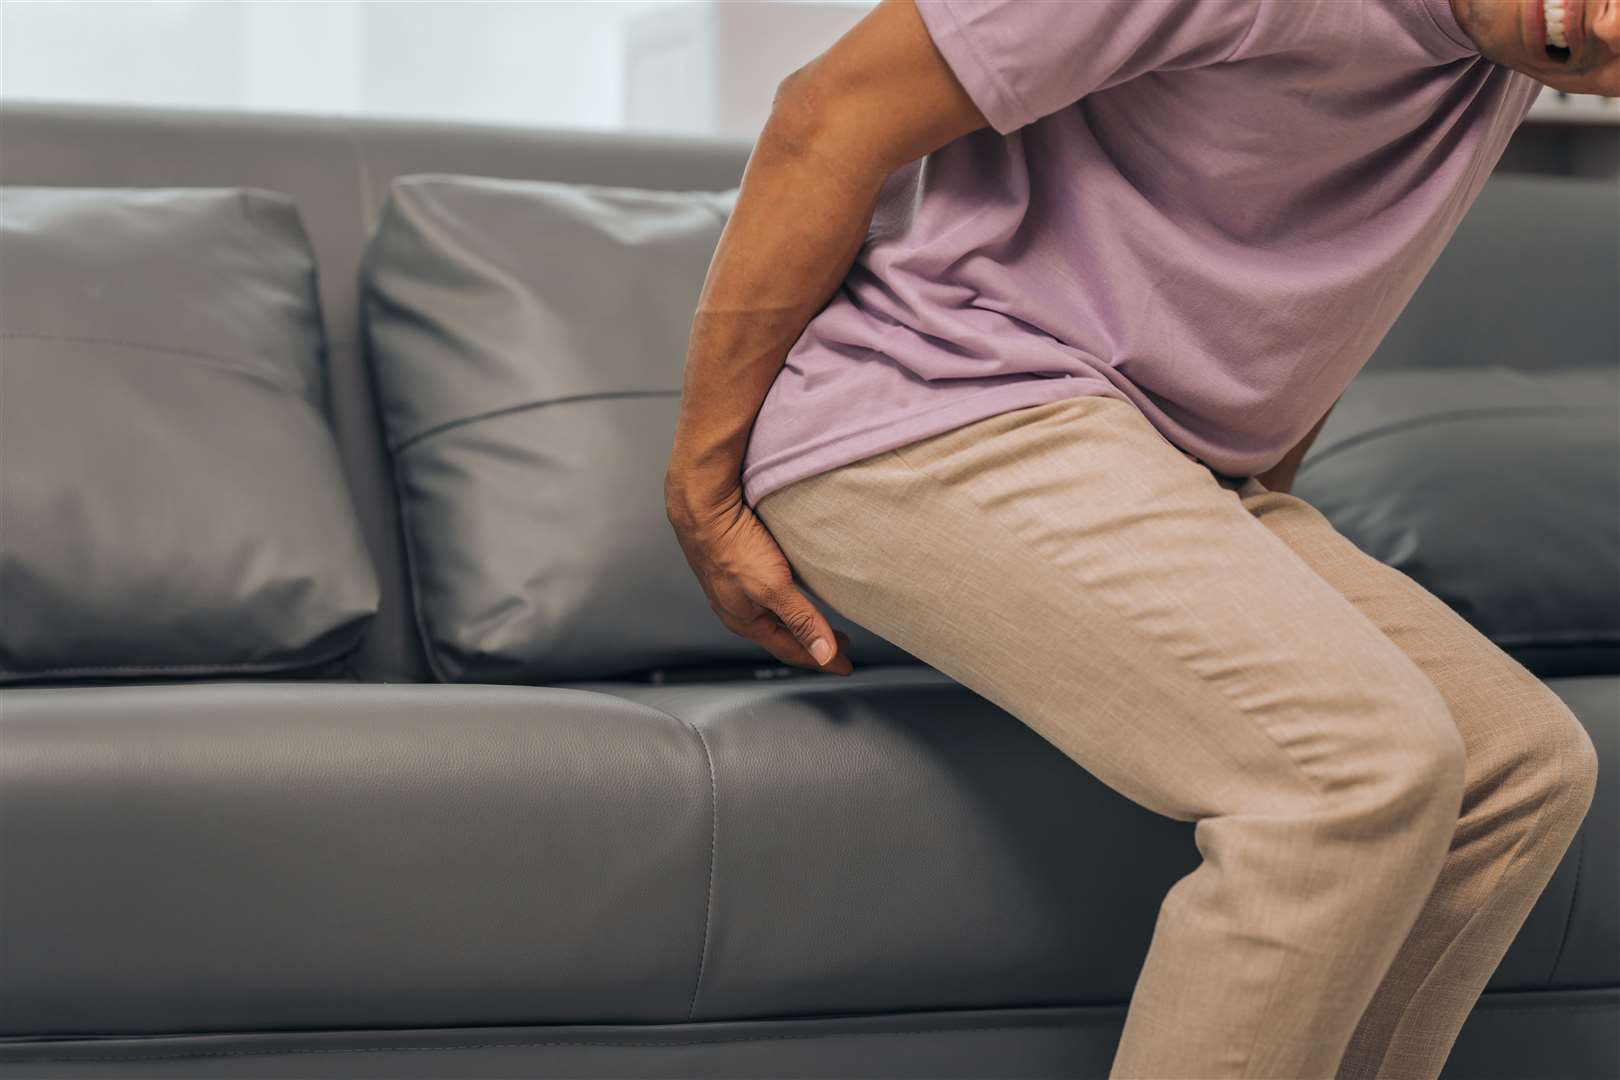 Even sitting on a sofa can cause some people pain.